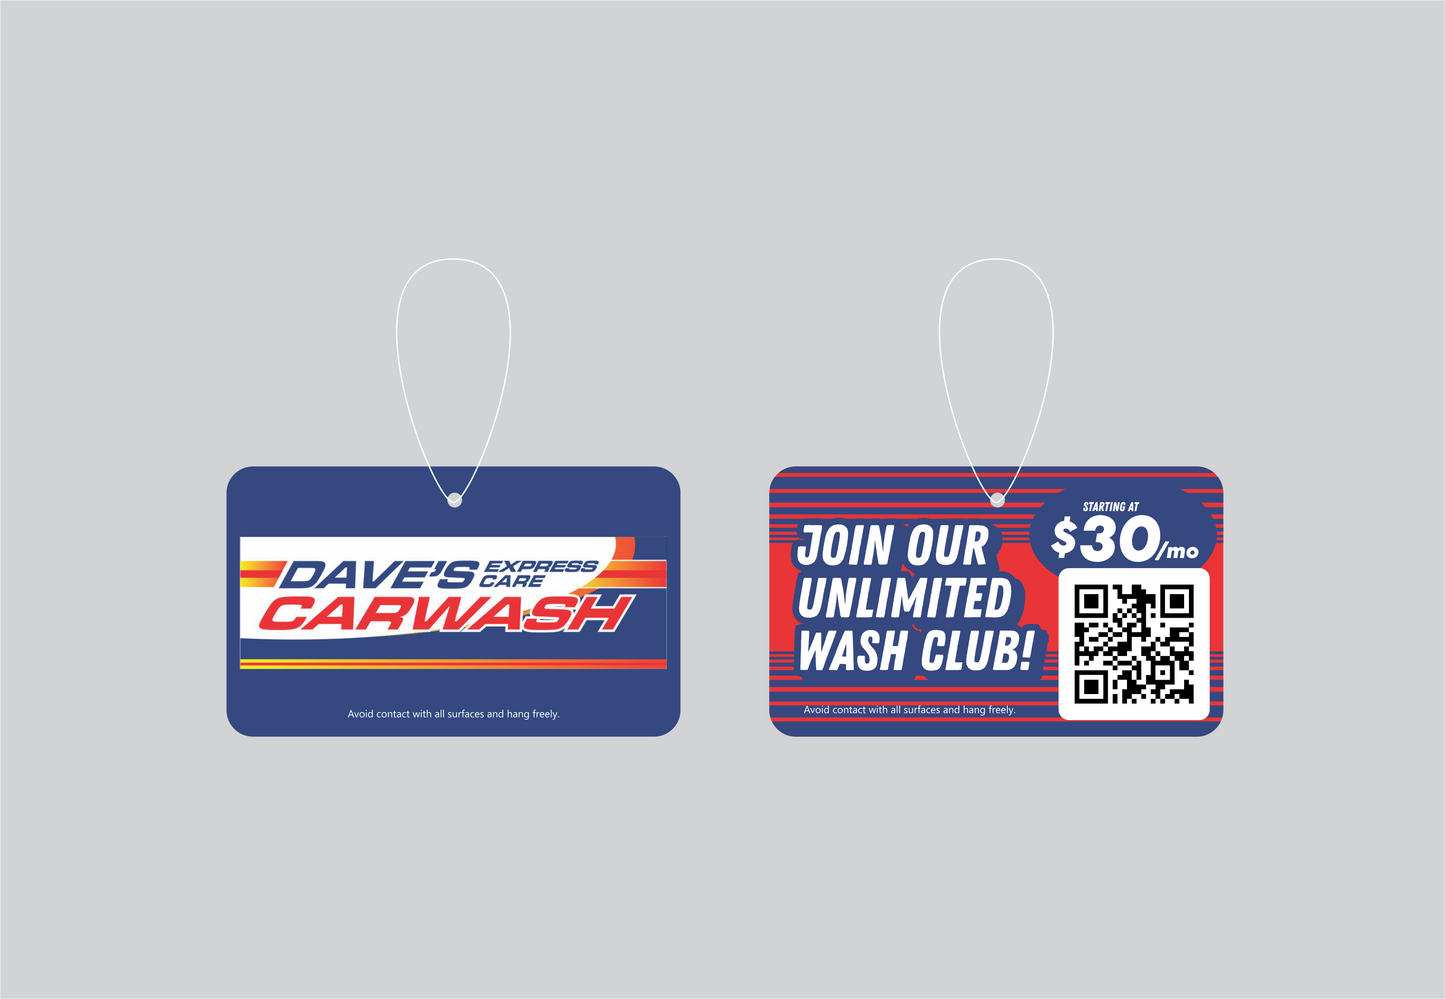 Dave's Express Care Car Wash - Air Fresheners